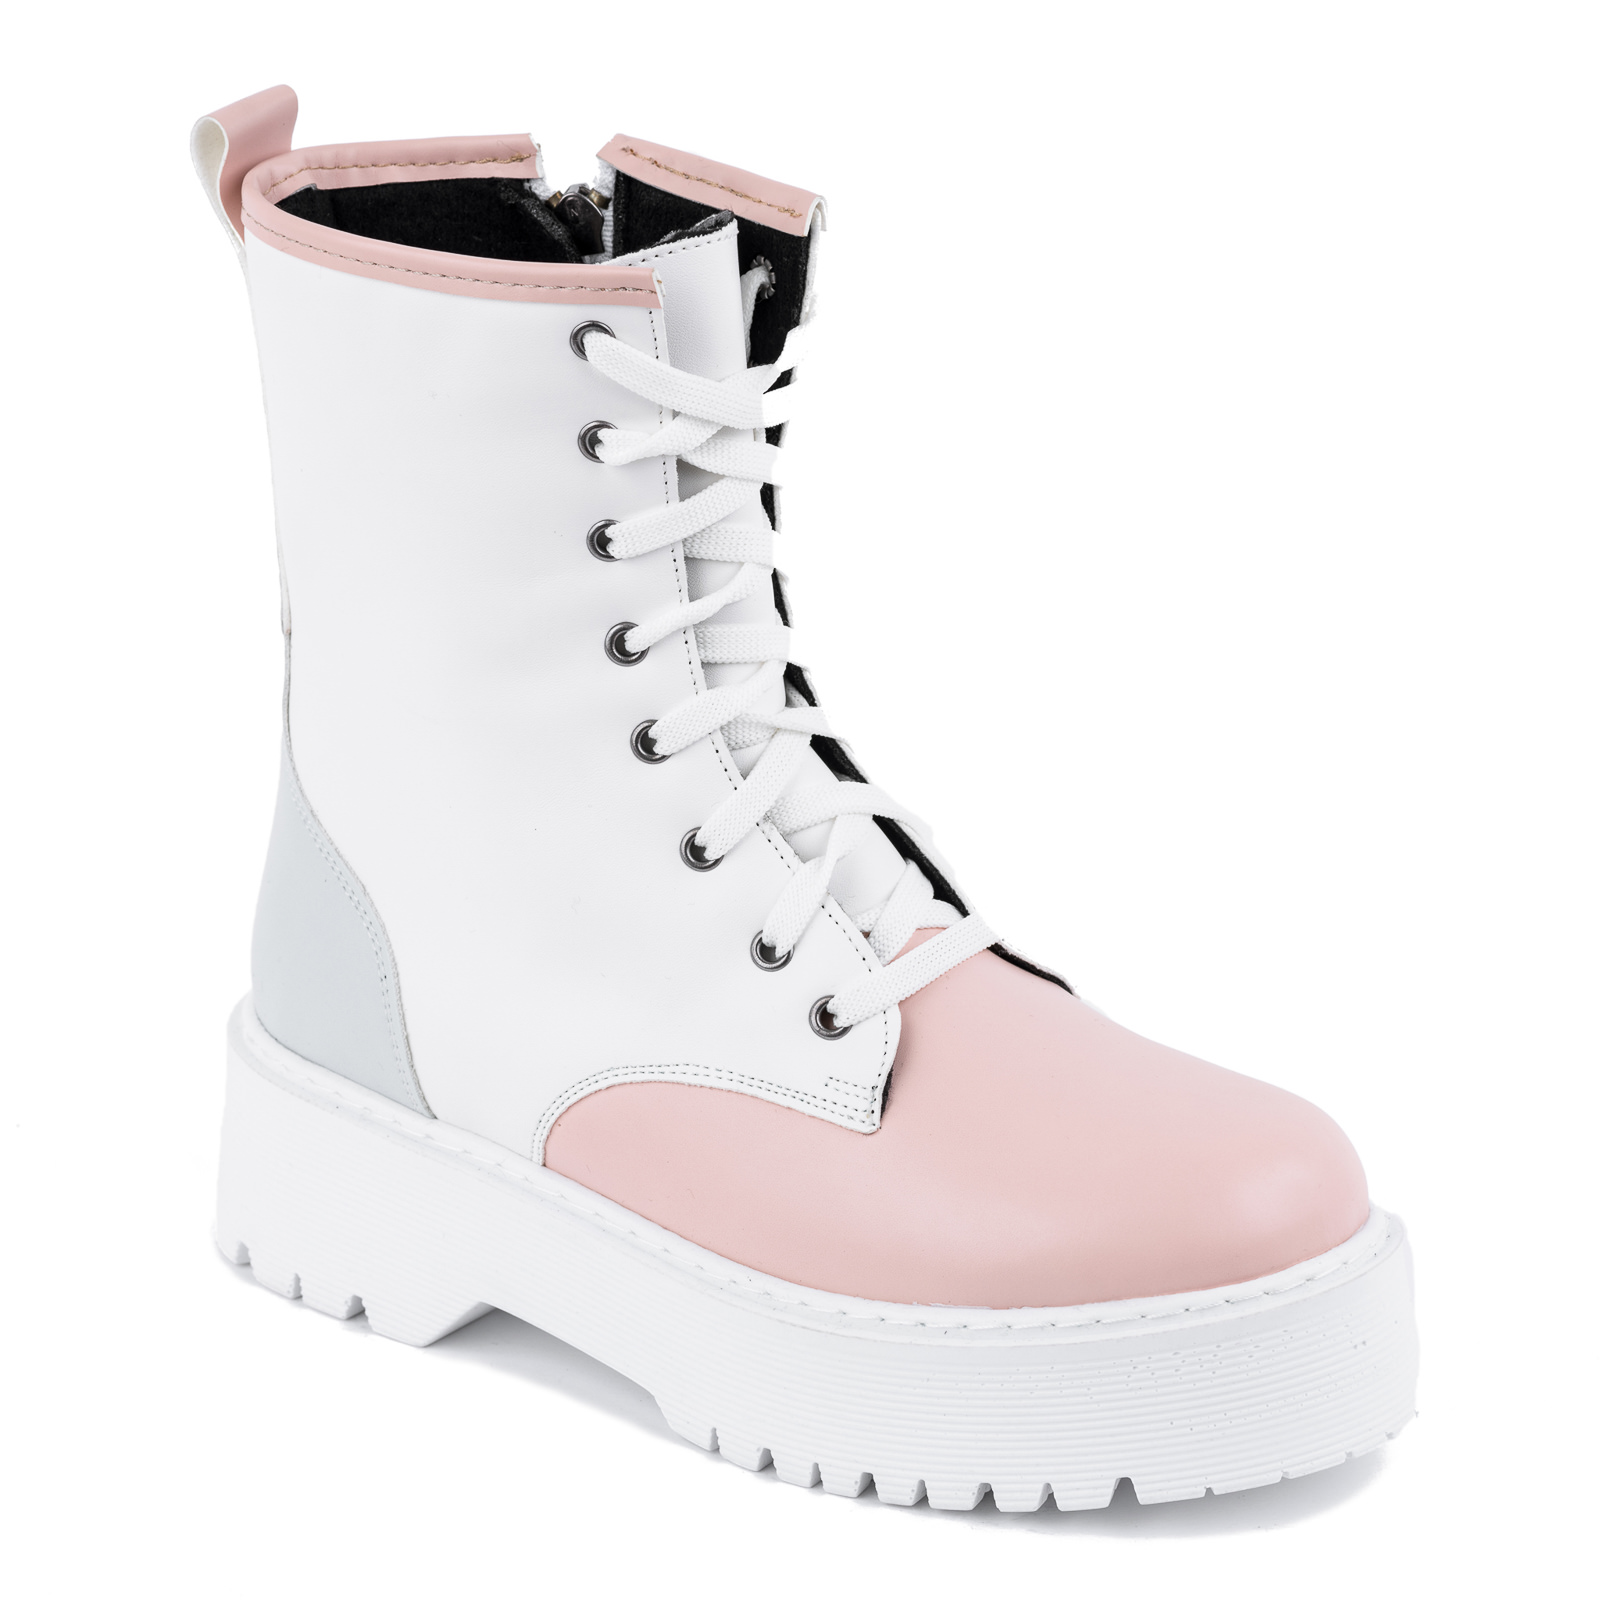 MARTIN BOOTS WITH WHITE SOLE - WHITE/BLUE/ROSE